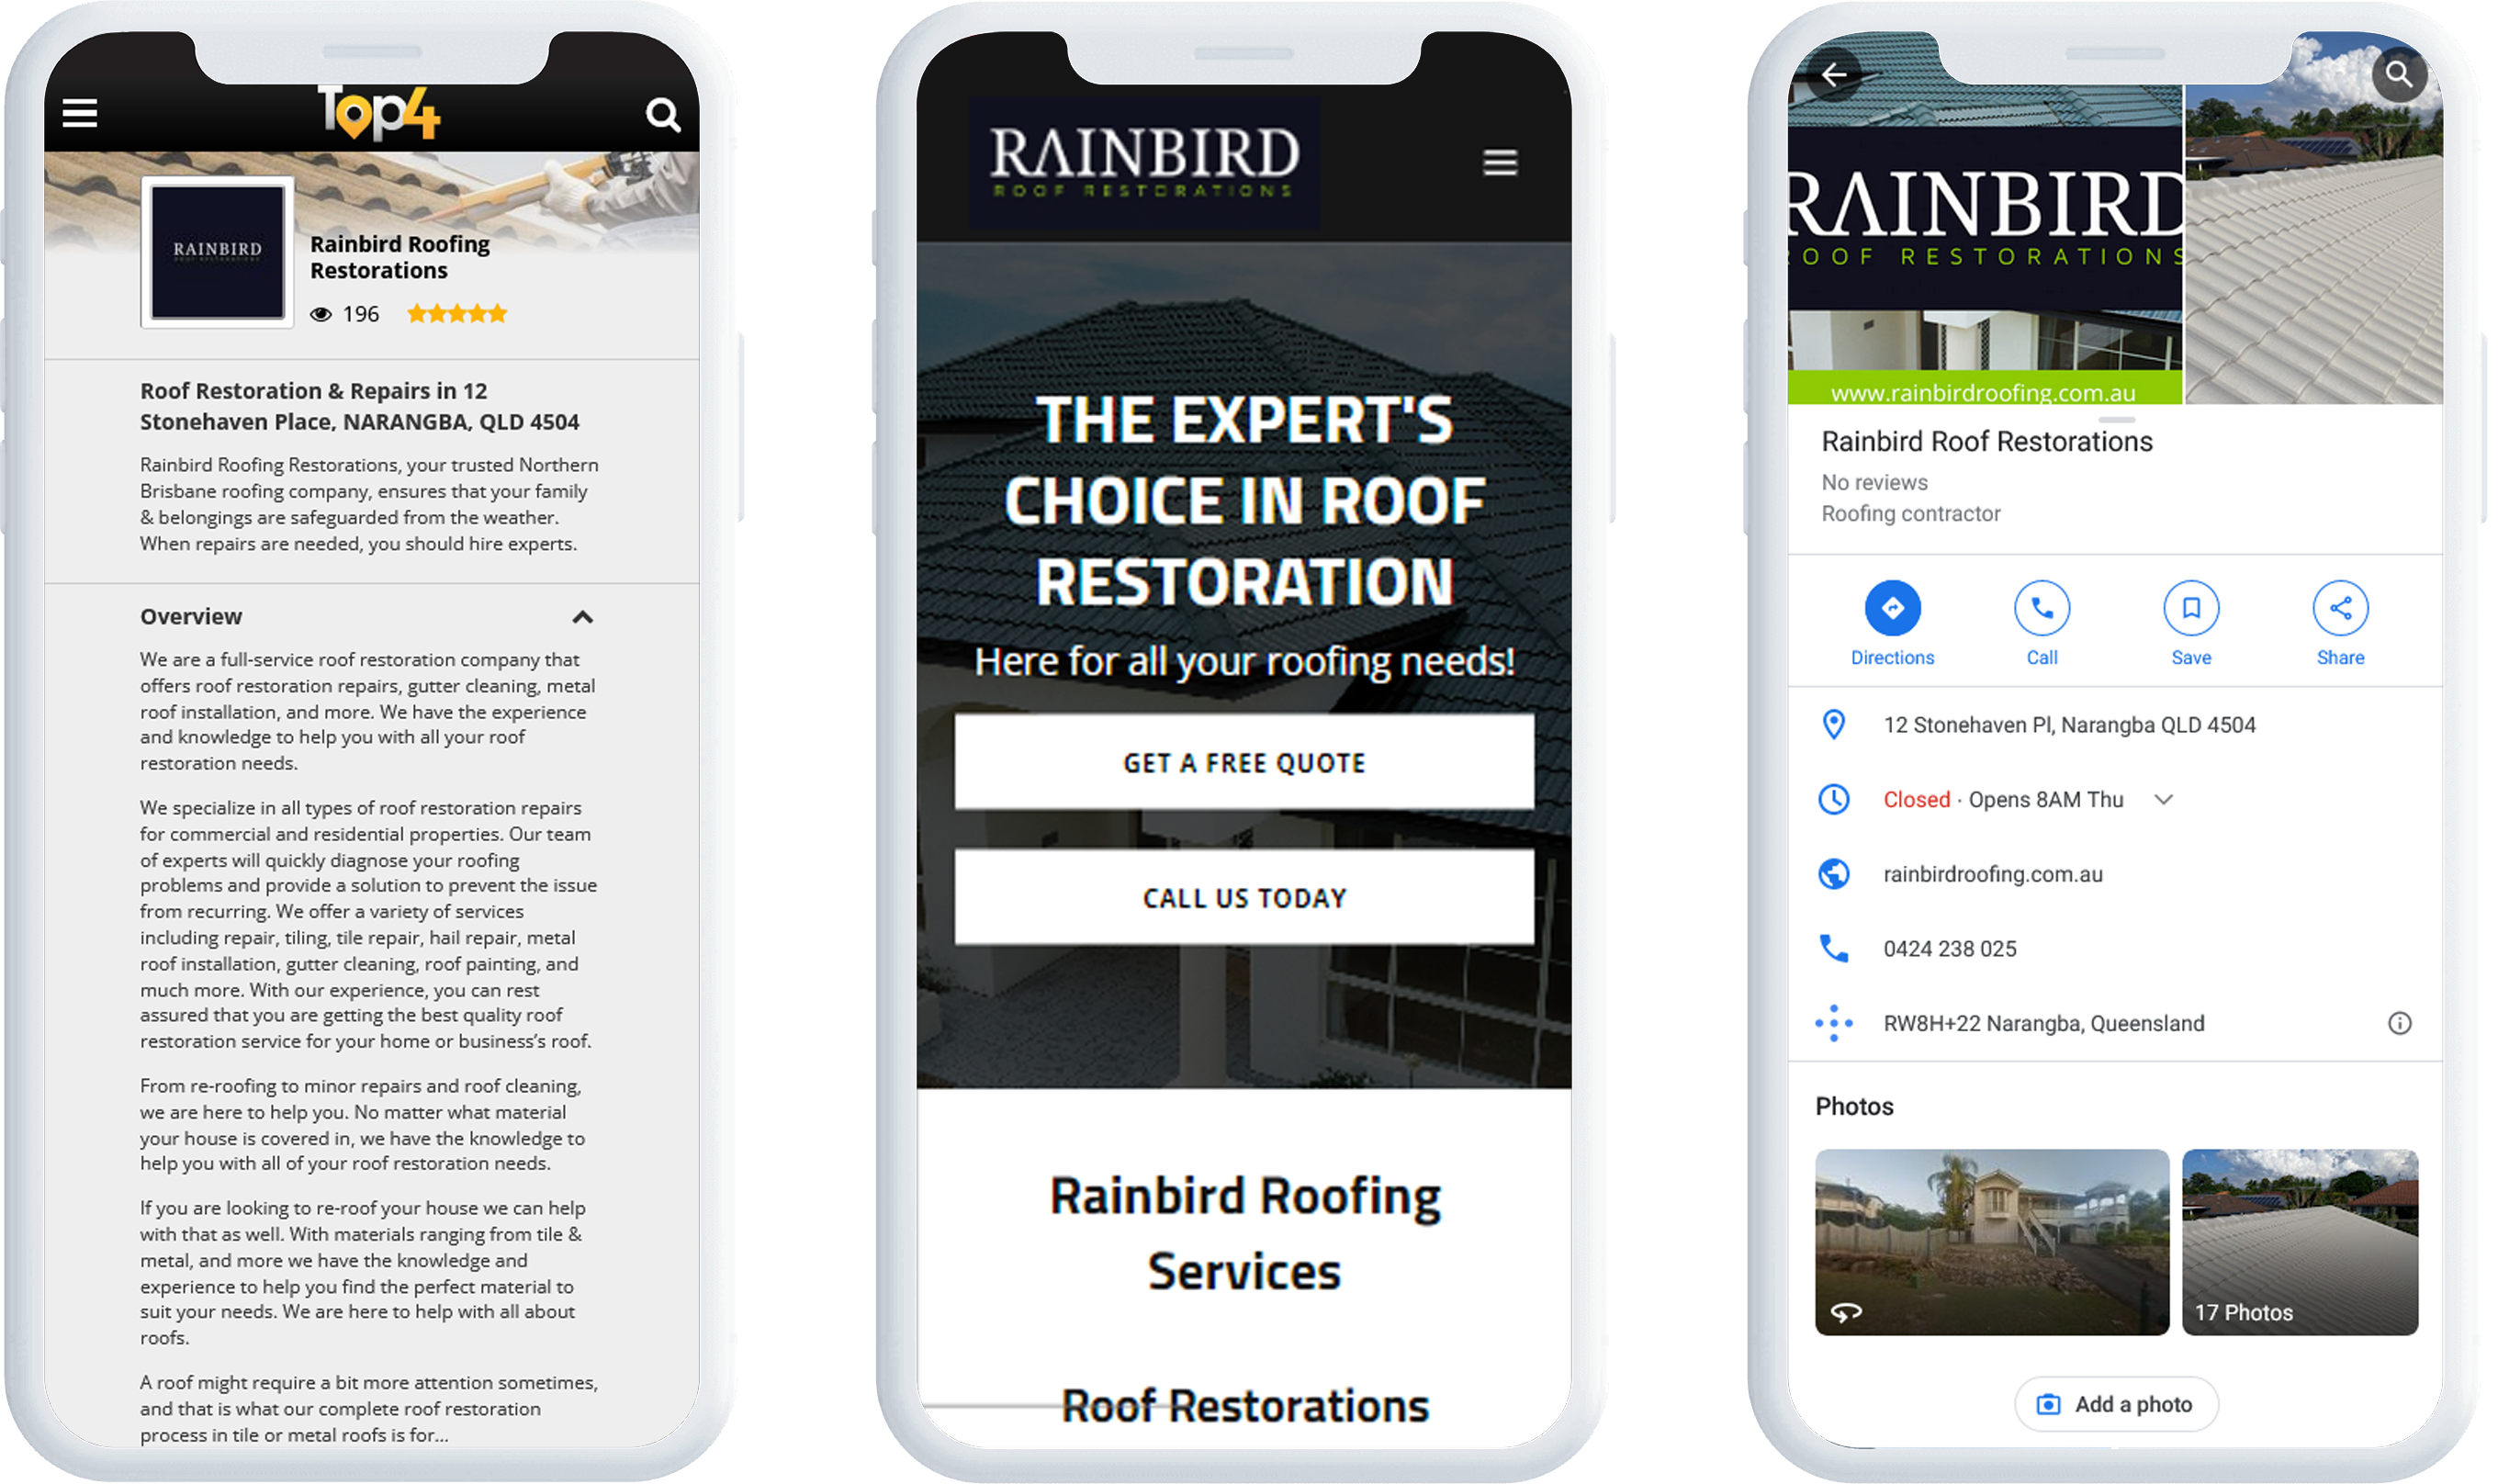 SEO Services for Roofting Construction – Rainbird Roofing